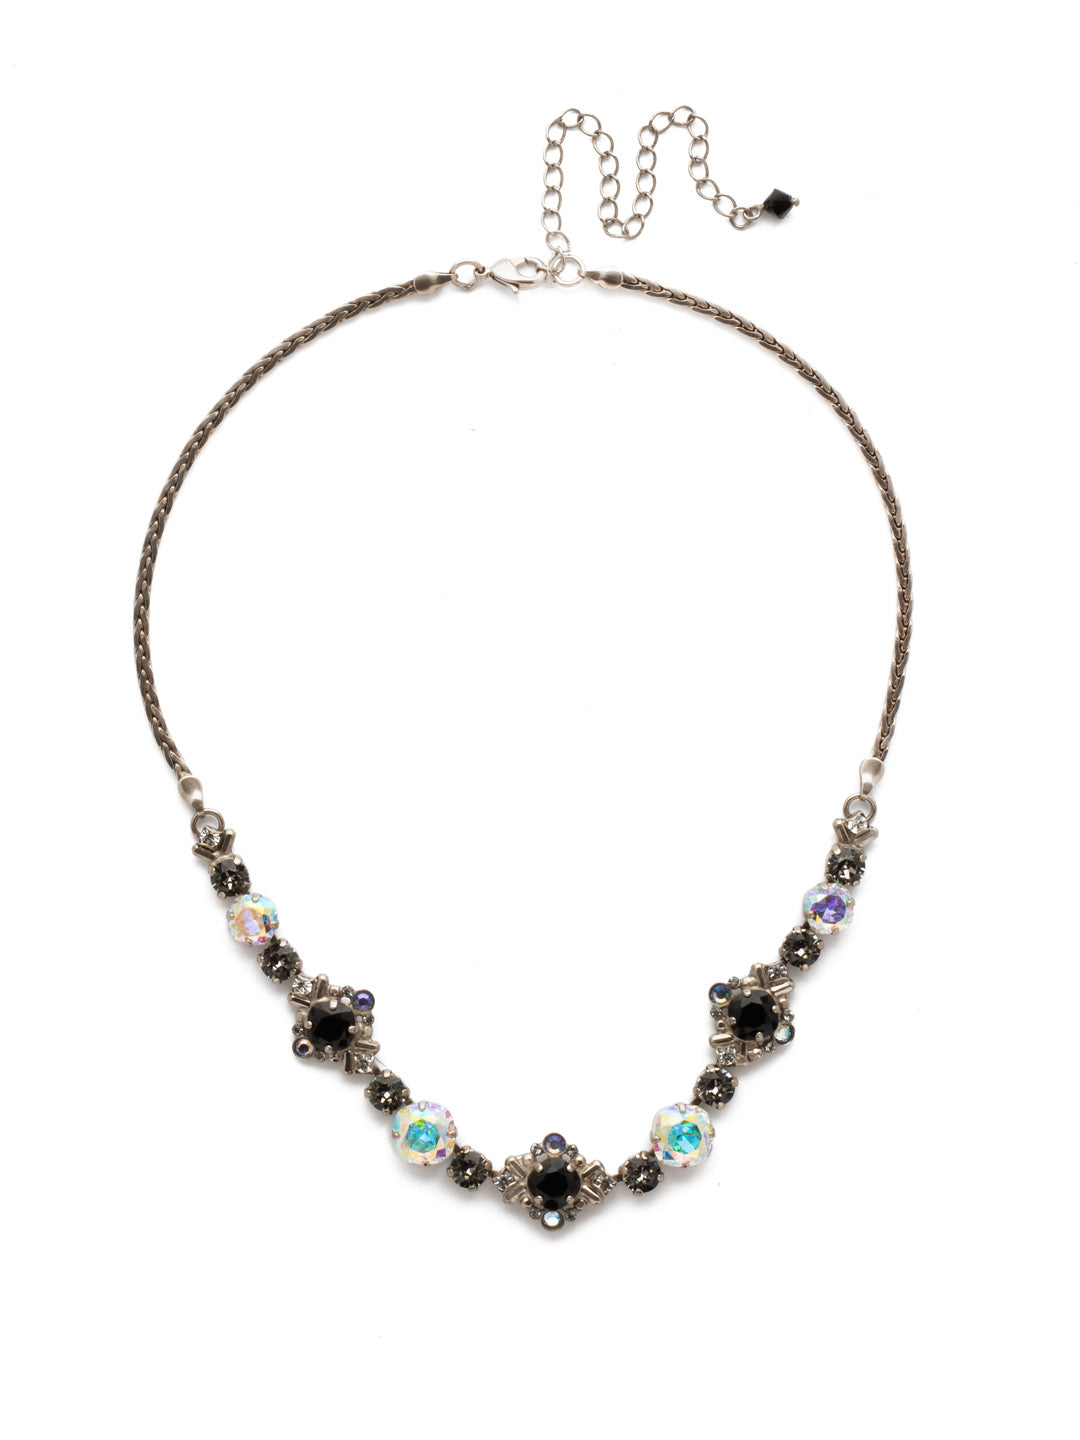 Stonecrop Tennis Necklace - NDX4ASBLT - A cushion cut stone in a detailed metal setting alternates with single round and cushion cut crystals in this dazzling half line necklace. From Sorrelli's Black Tie collection in our Antique Silver-tone finish.